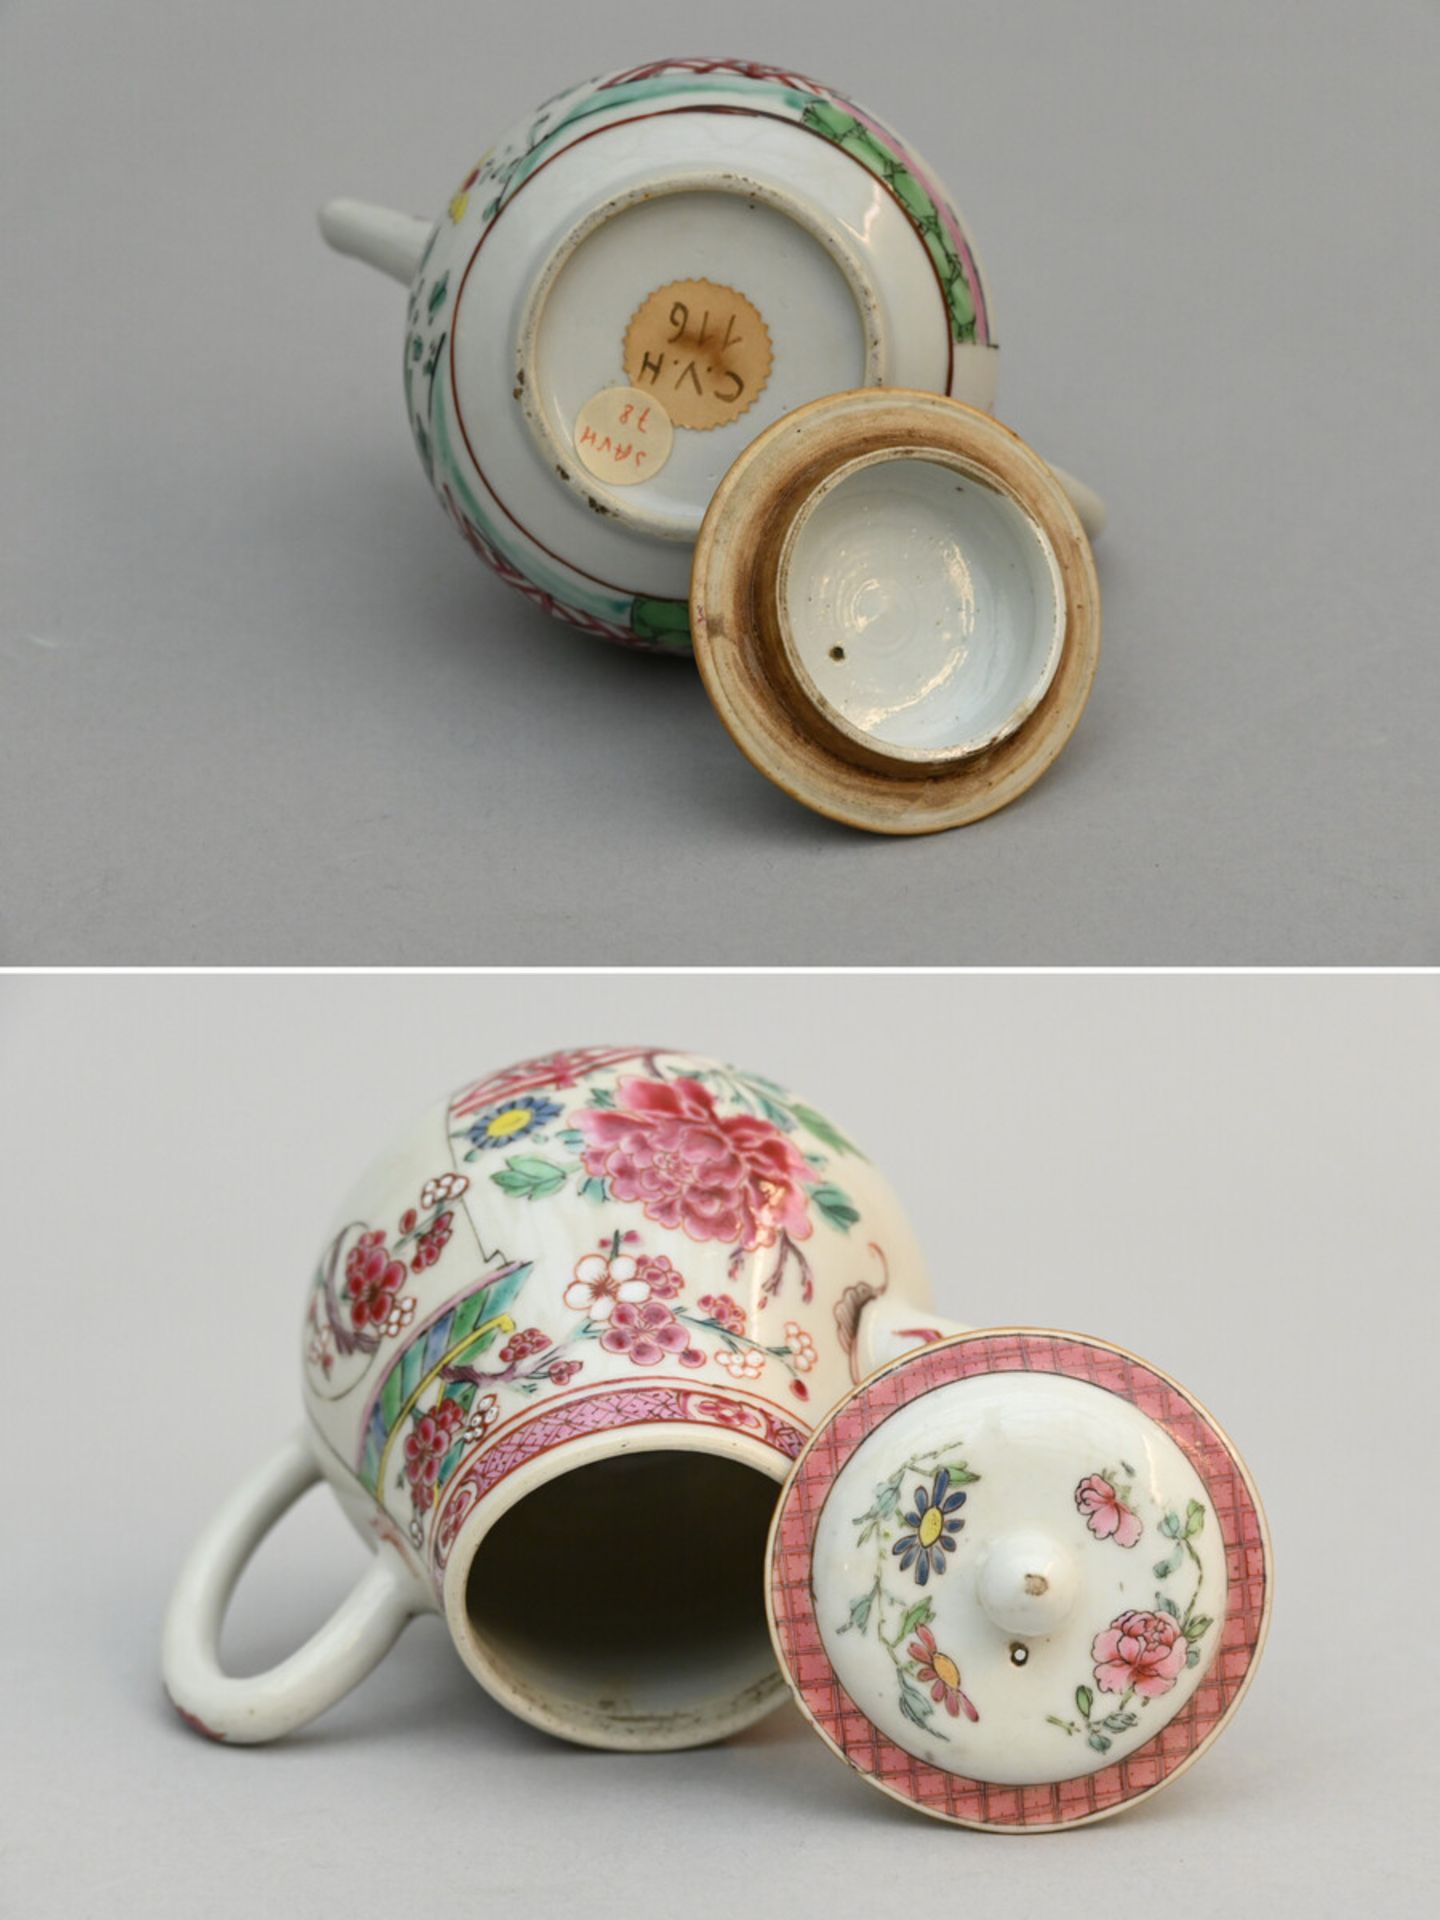 Two teapots in Chinese porcelain 'flowers', 18th century (14.5x12cm) (*) - Image 5 of 6